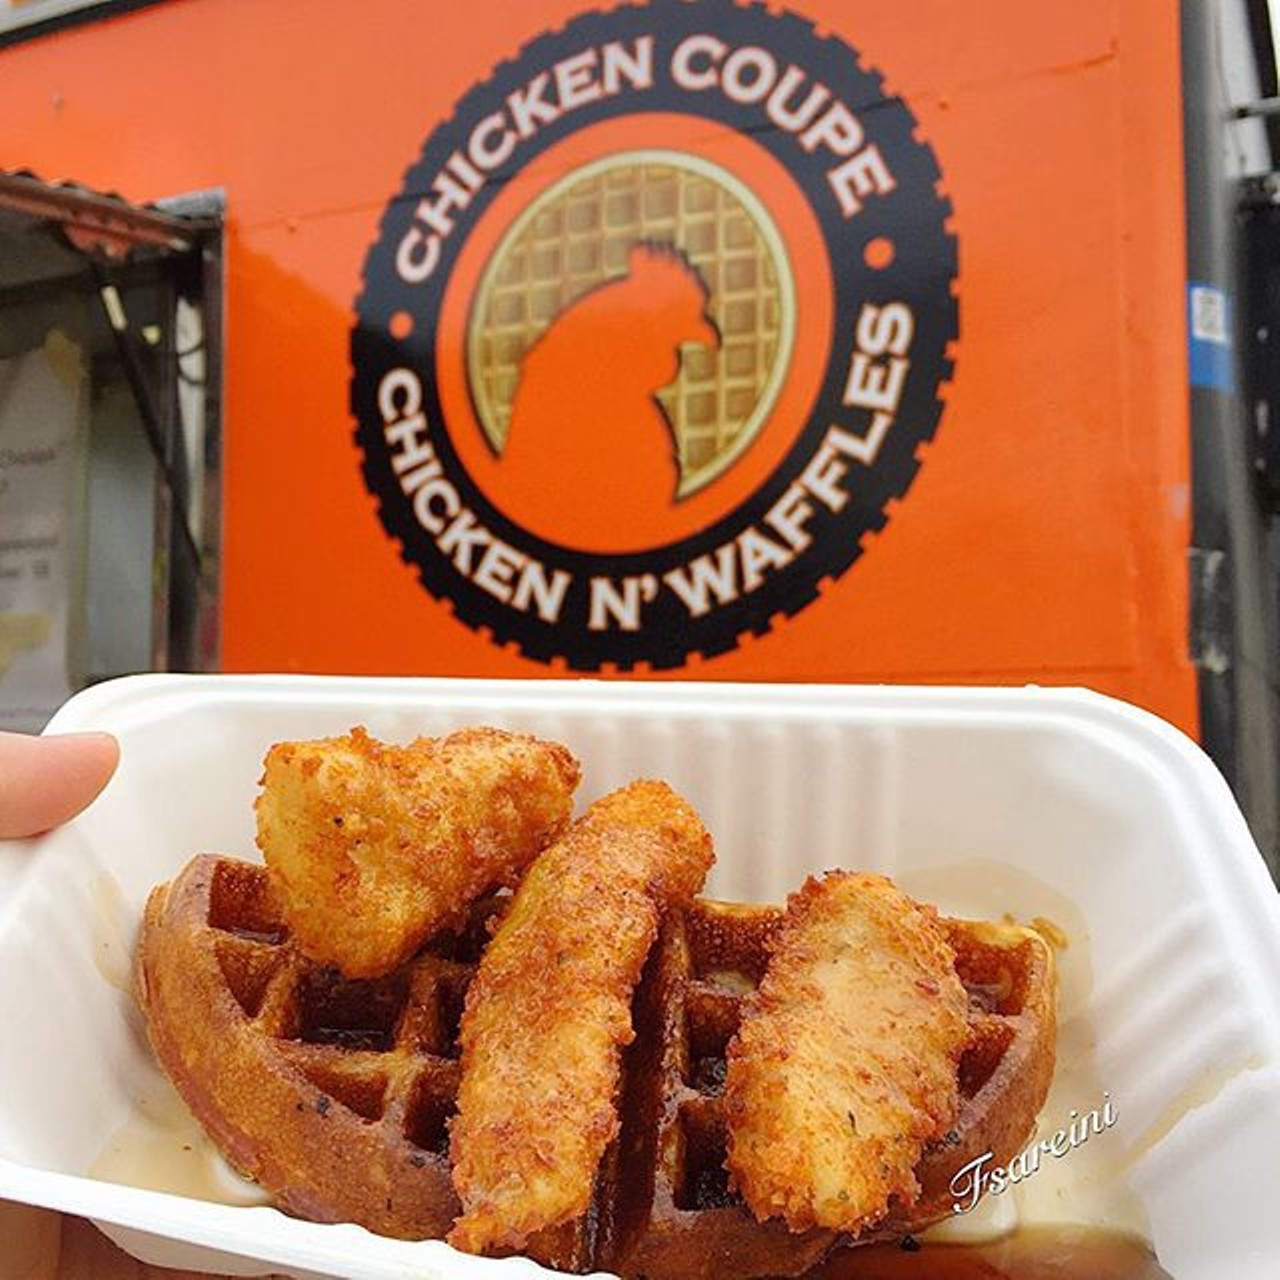 Chicken Coupe 
Nothing is better than chicken and waffles. The chicken coupe serves up mouth watering fried chicken with puffy belgian waffles. They even have fried chicken in a waffle cone! (Photo via Instagram user @fsareini)